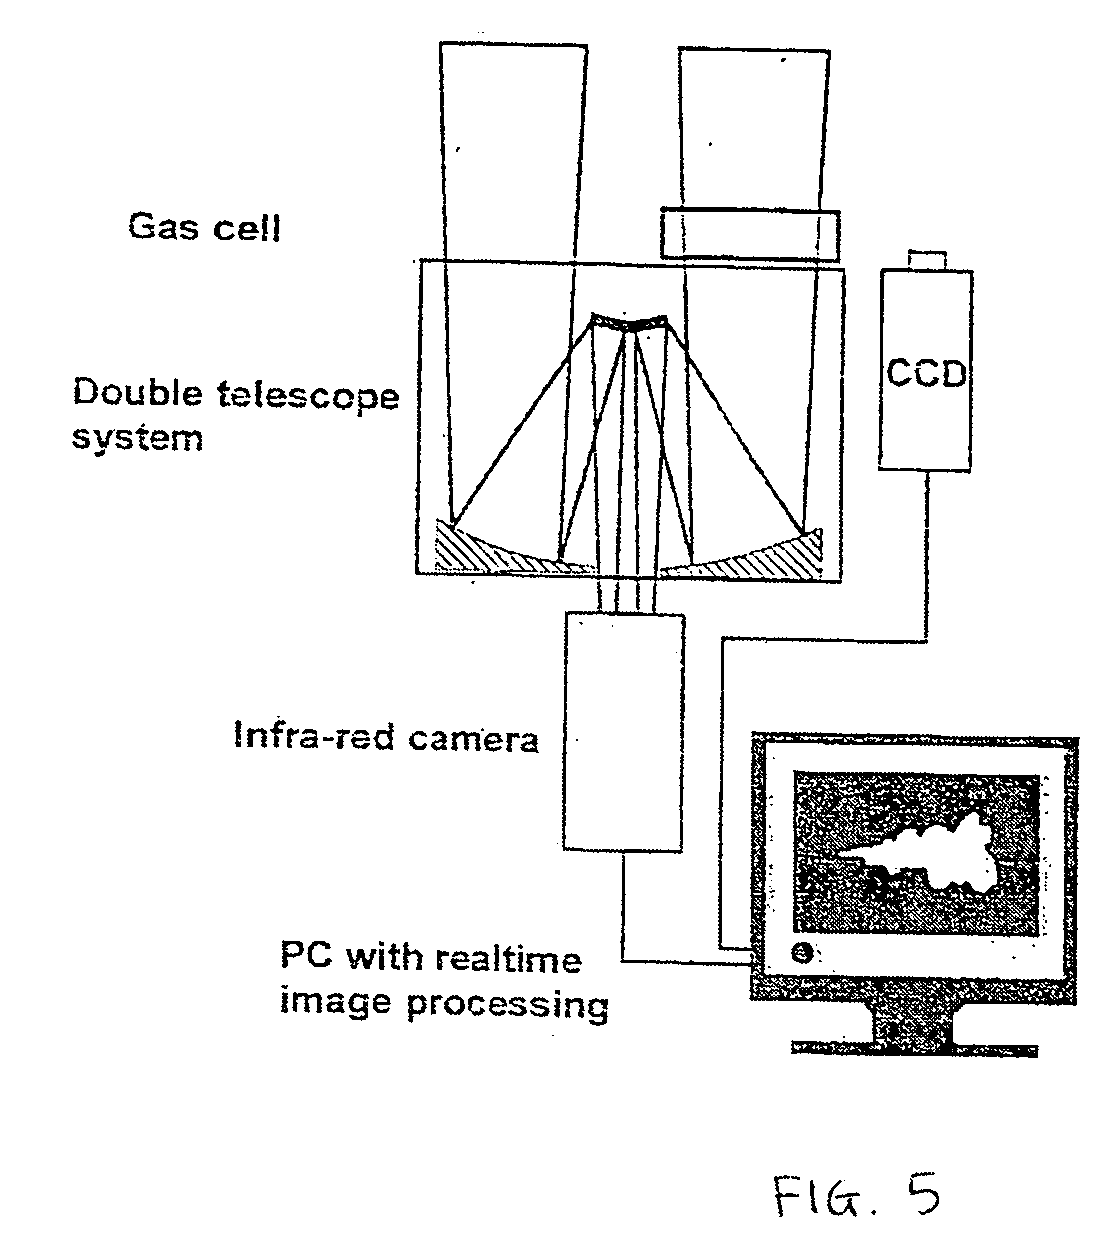 Localization of a point source of a visualized gas leak